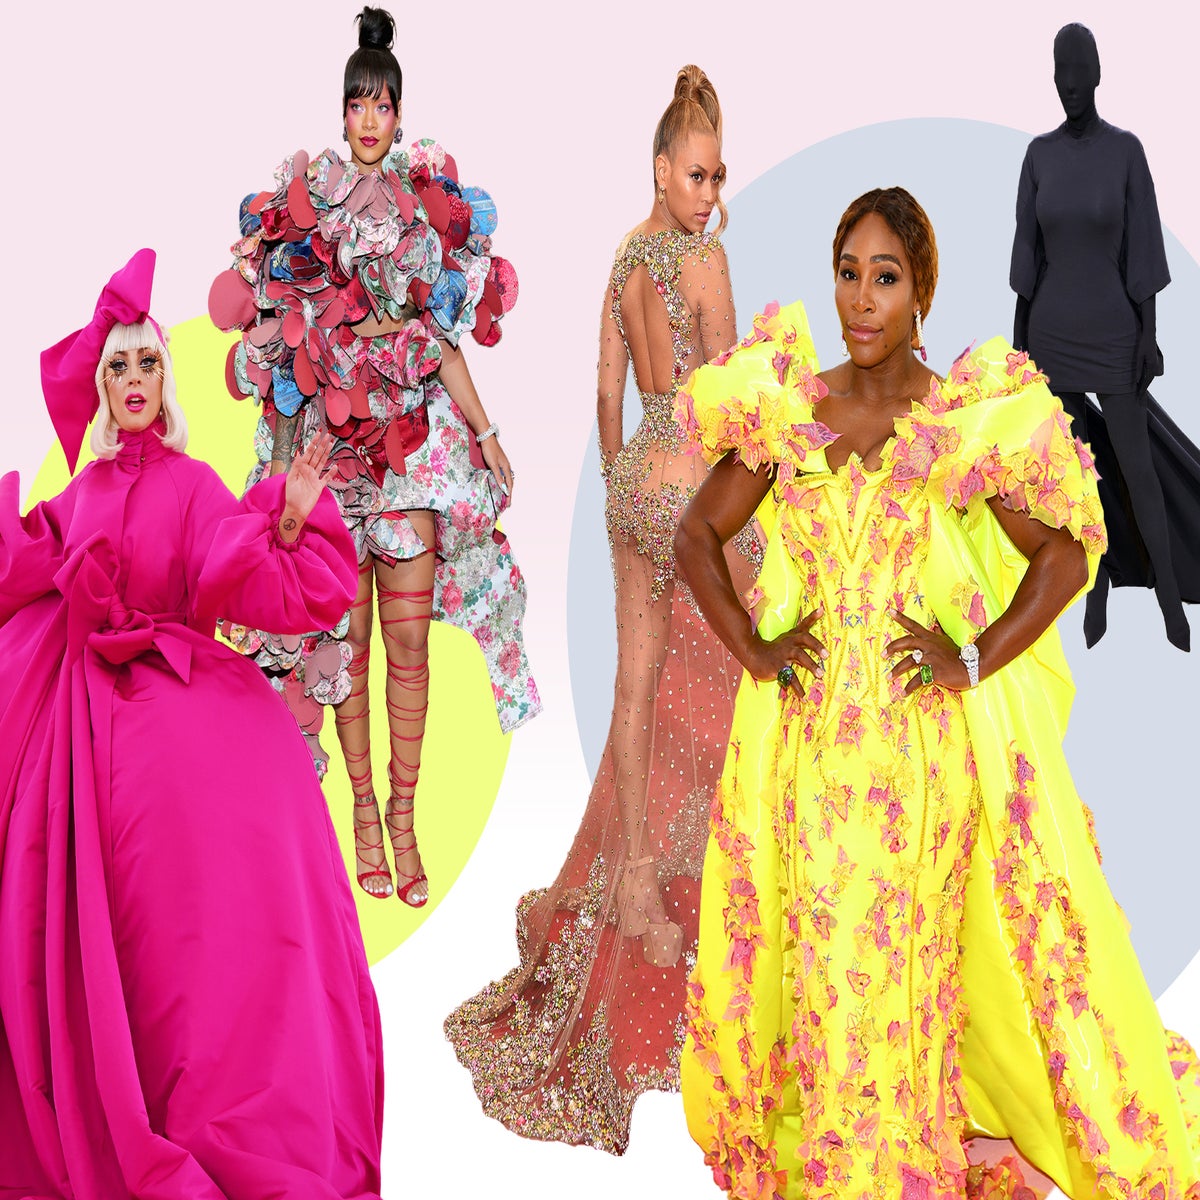 The Met Gala 2021's Best Red Carpet Looks and Wildest Moments